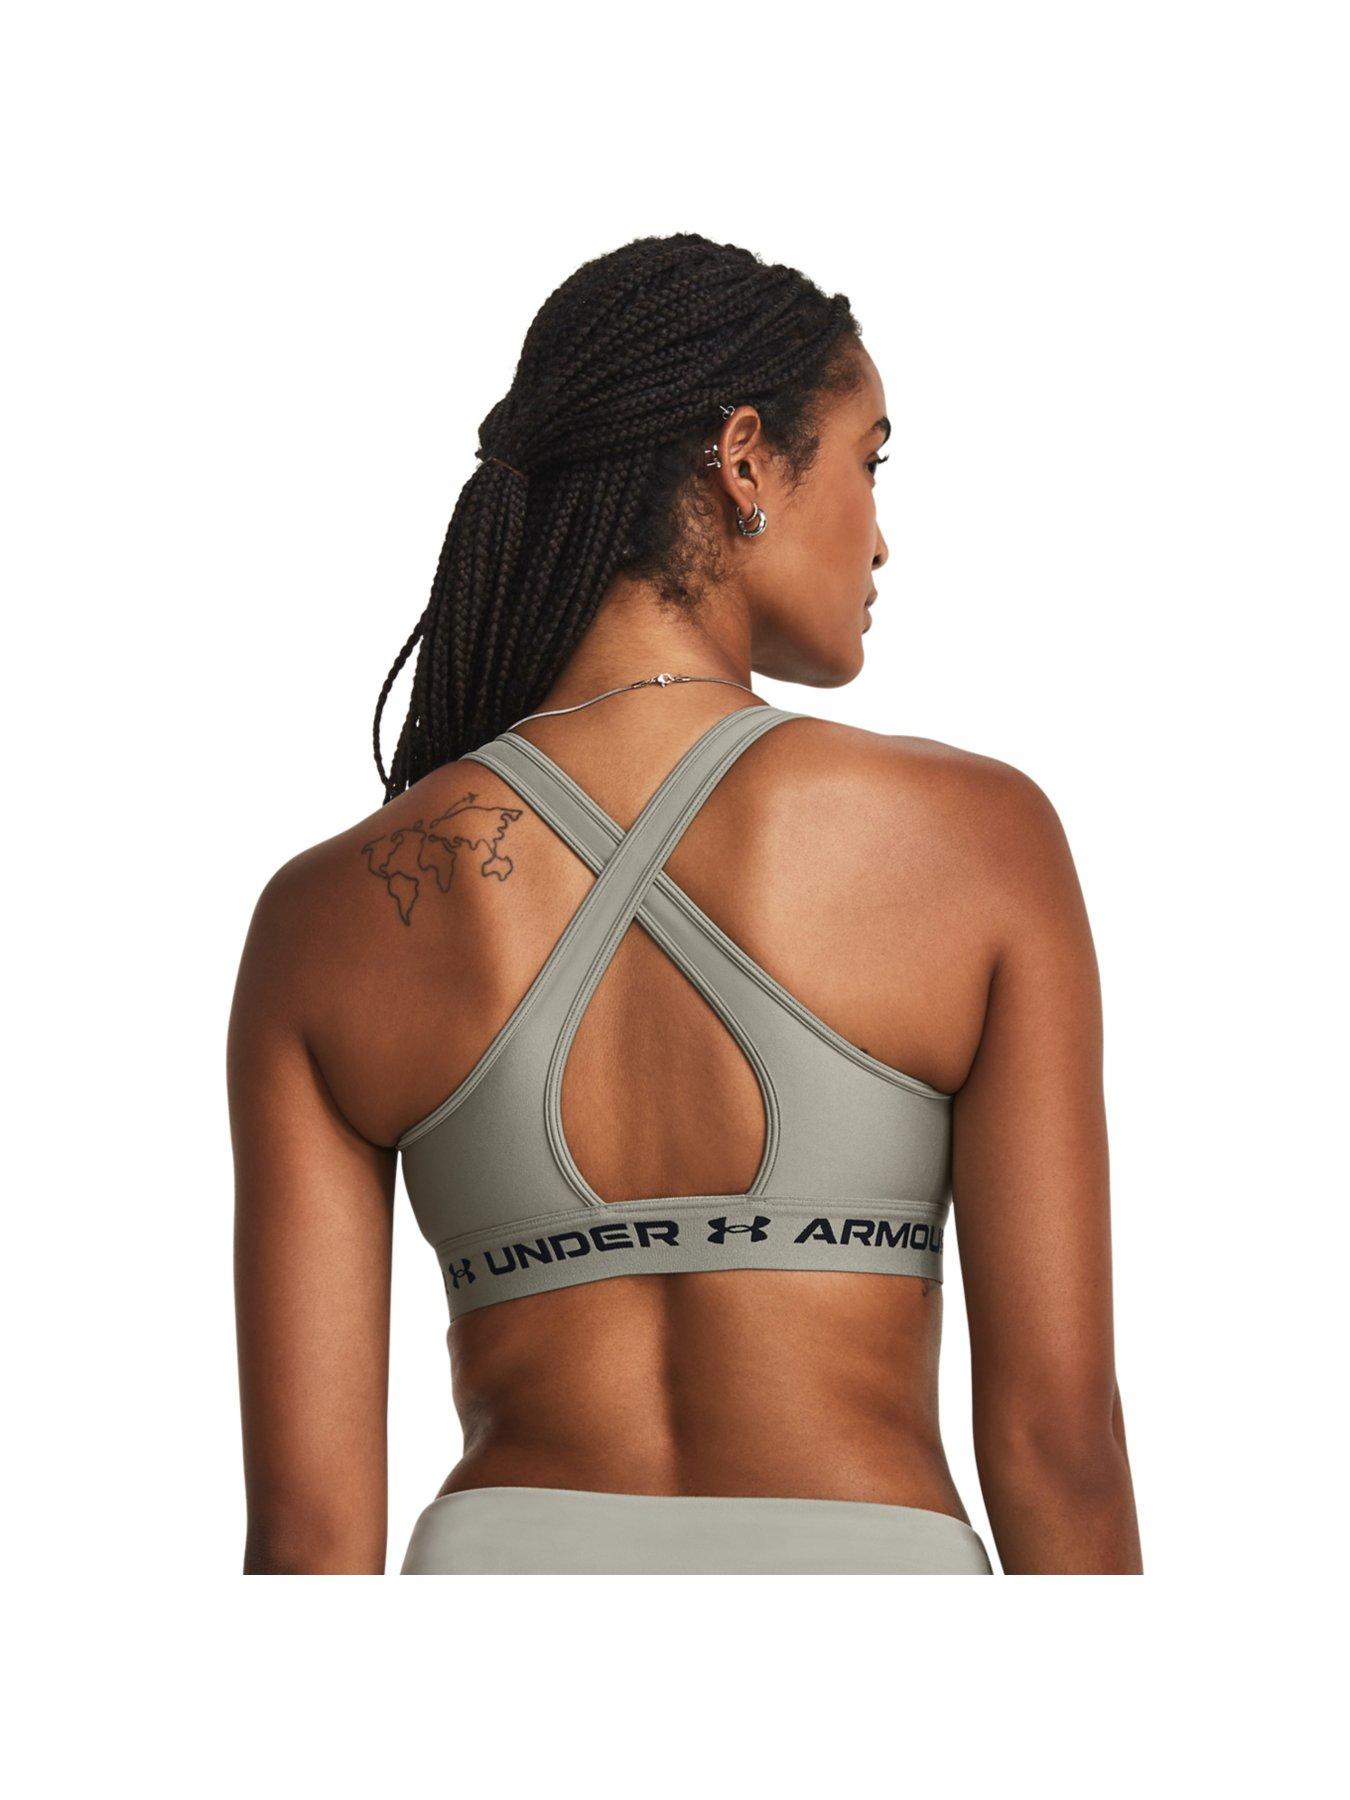 Buy Under Armour Crossback Mid Sports Bras Women Coral, Black